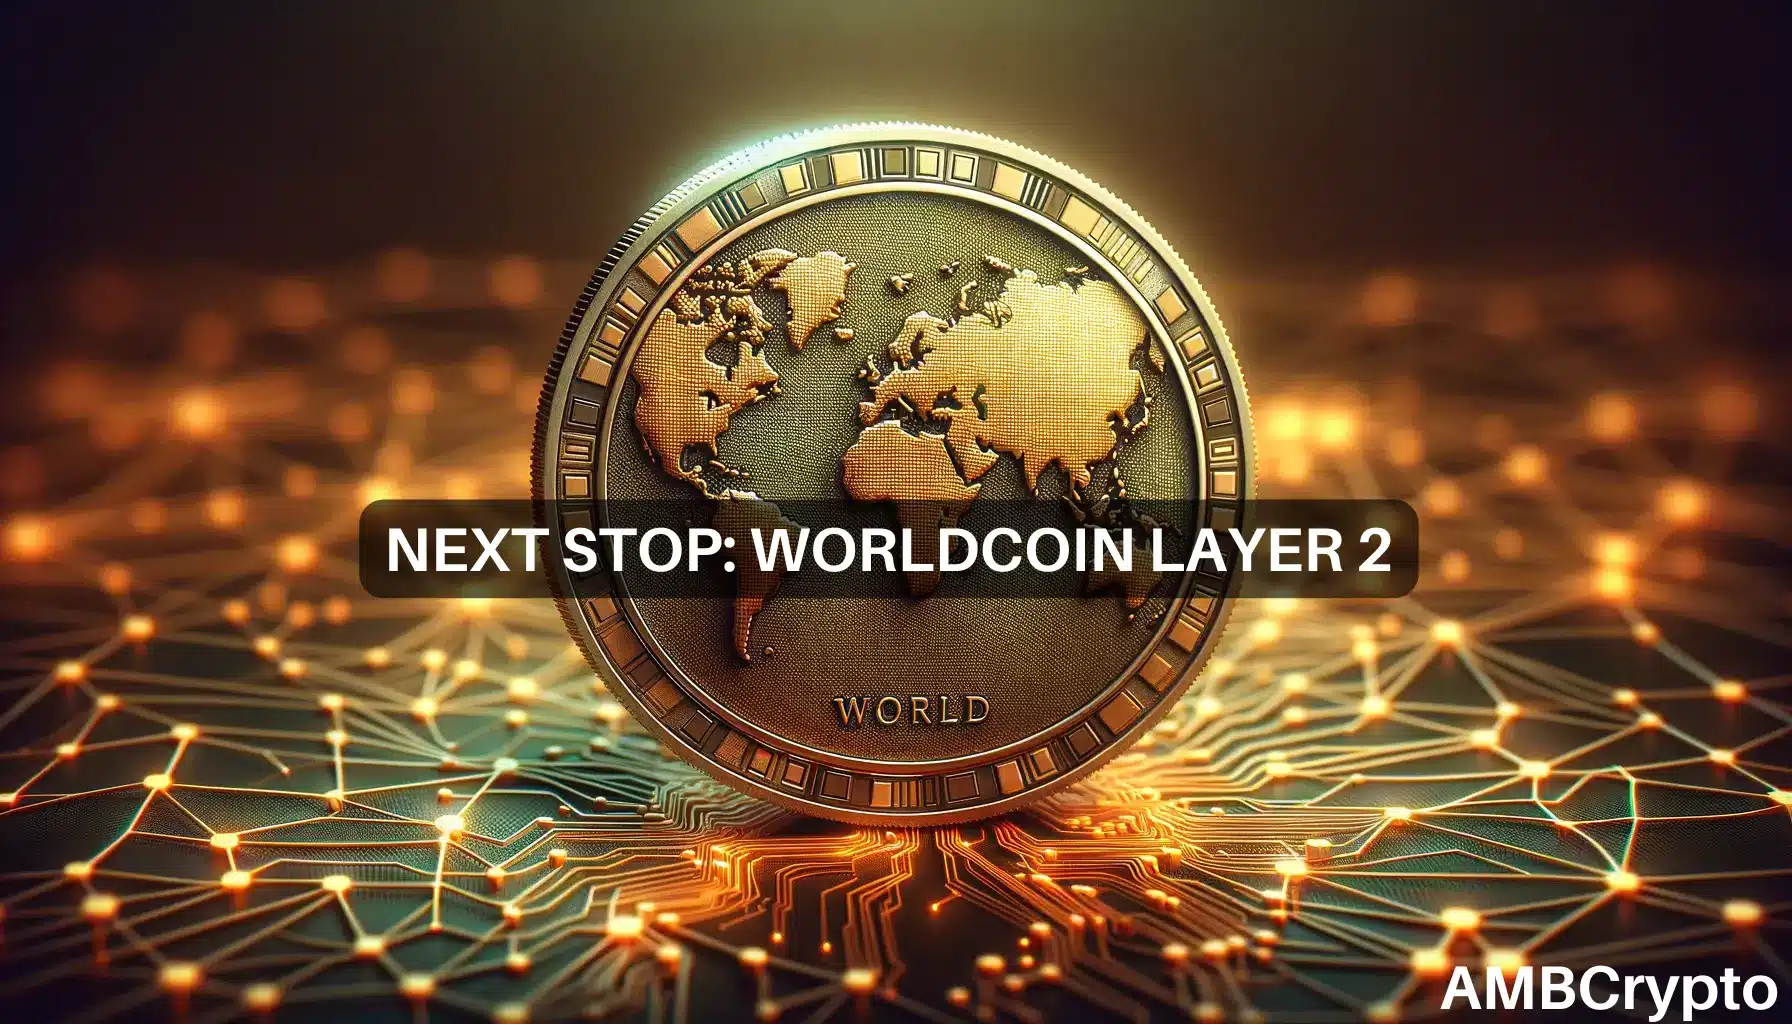 Worldcoin to implement Layer 2: Impact on WLD token uncertain